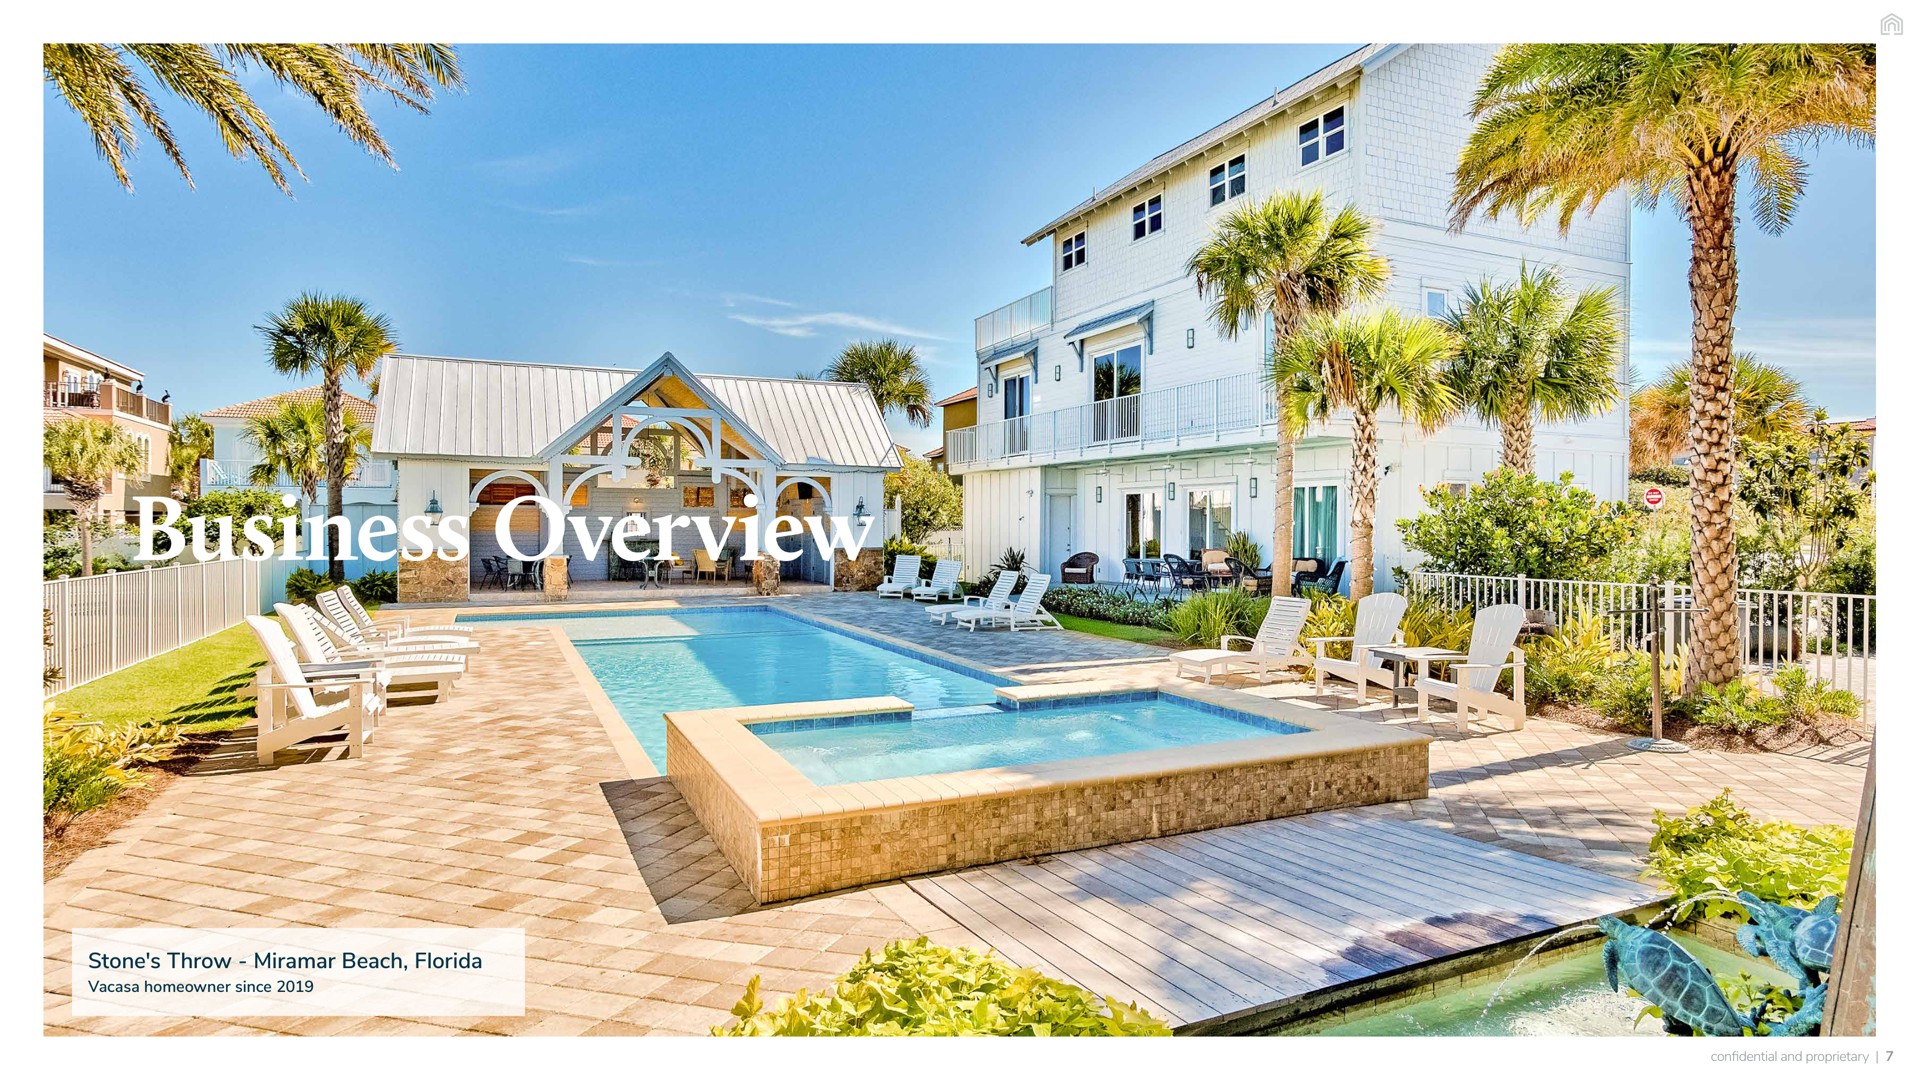 business overview i homeowner since stone throw beach | Vacasa